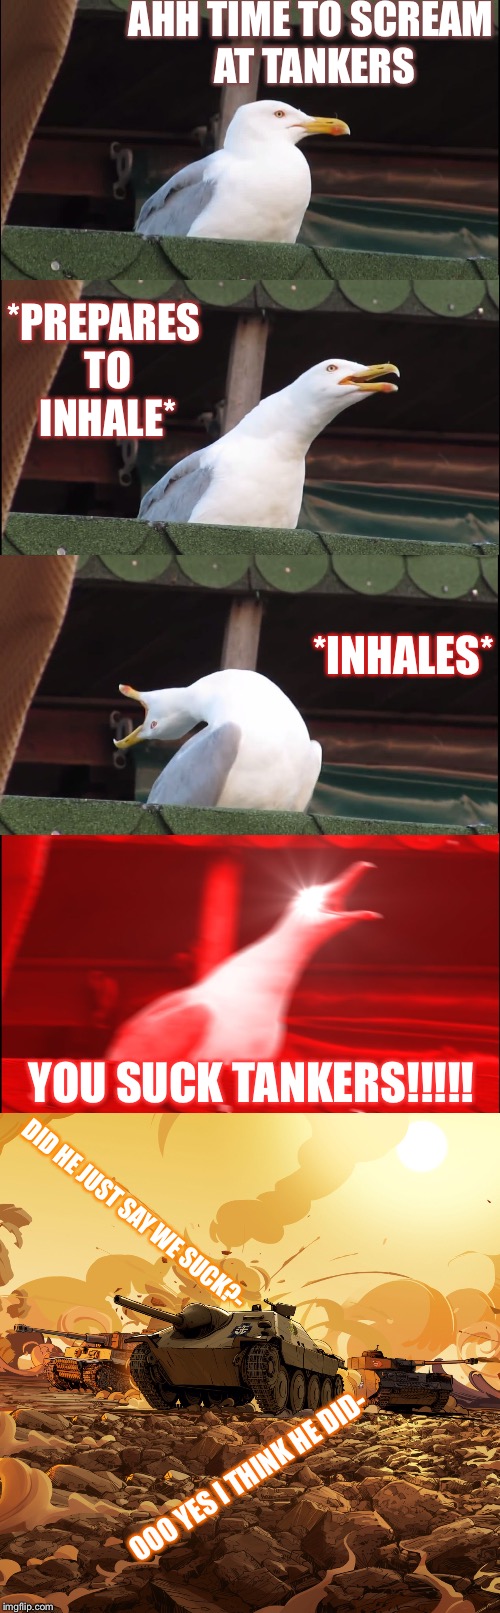 The inhaling seagull scream pin at the tankers. *laughs* XD | AHH TIME TO SCREAM AT TANKERS; *PREPARES TO INHALE*; *INHALES*; YOU SUCK TANKERS!!!!! DID HE JUST SAY WE SUCK?-; OOO YES I THINK HE DID- | image tagged in inhaling seagull,memes,world of tanks blitz | made w/ Imgflip meme maker